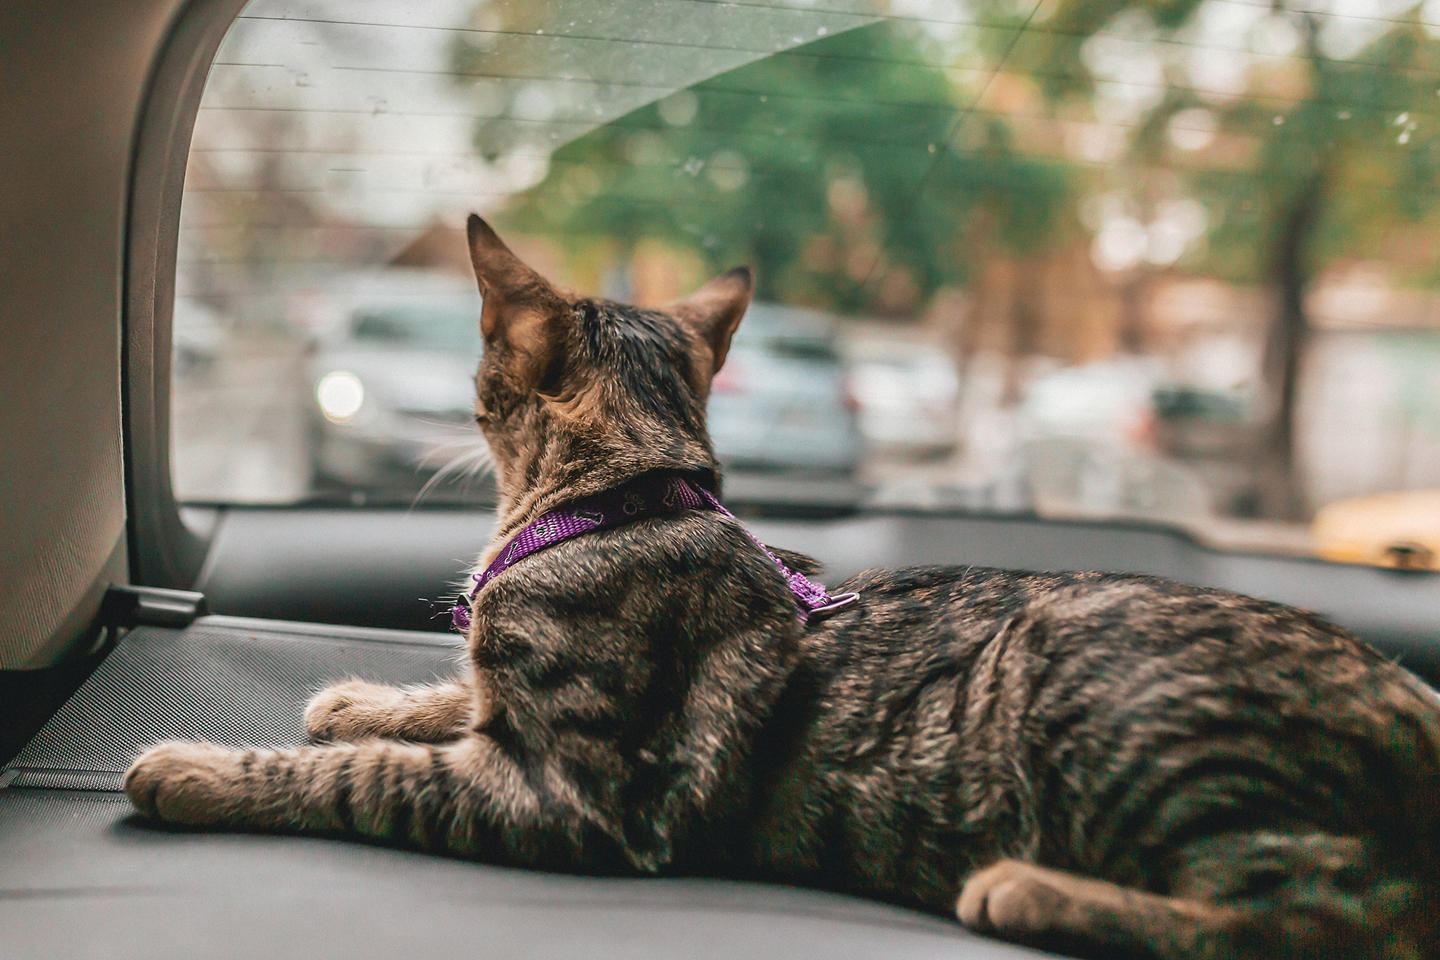 Cat looking out of car window.